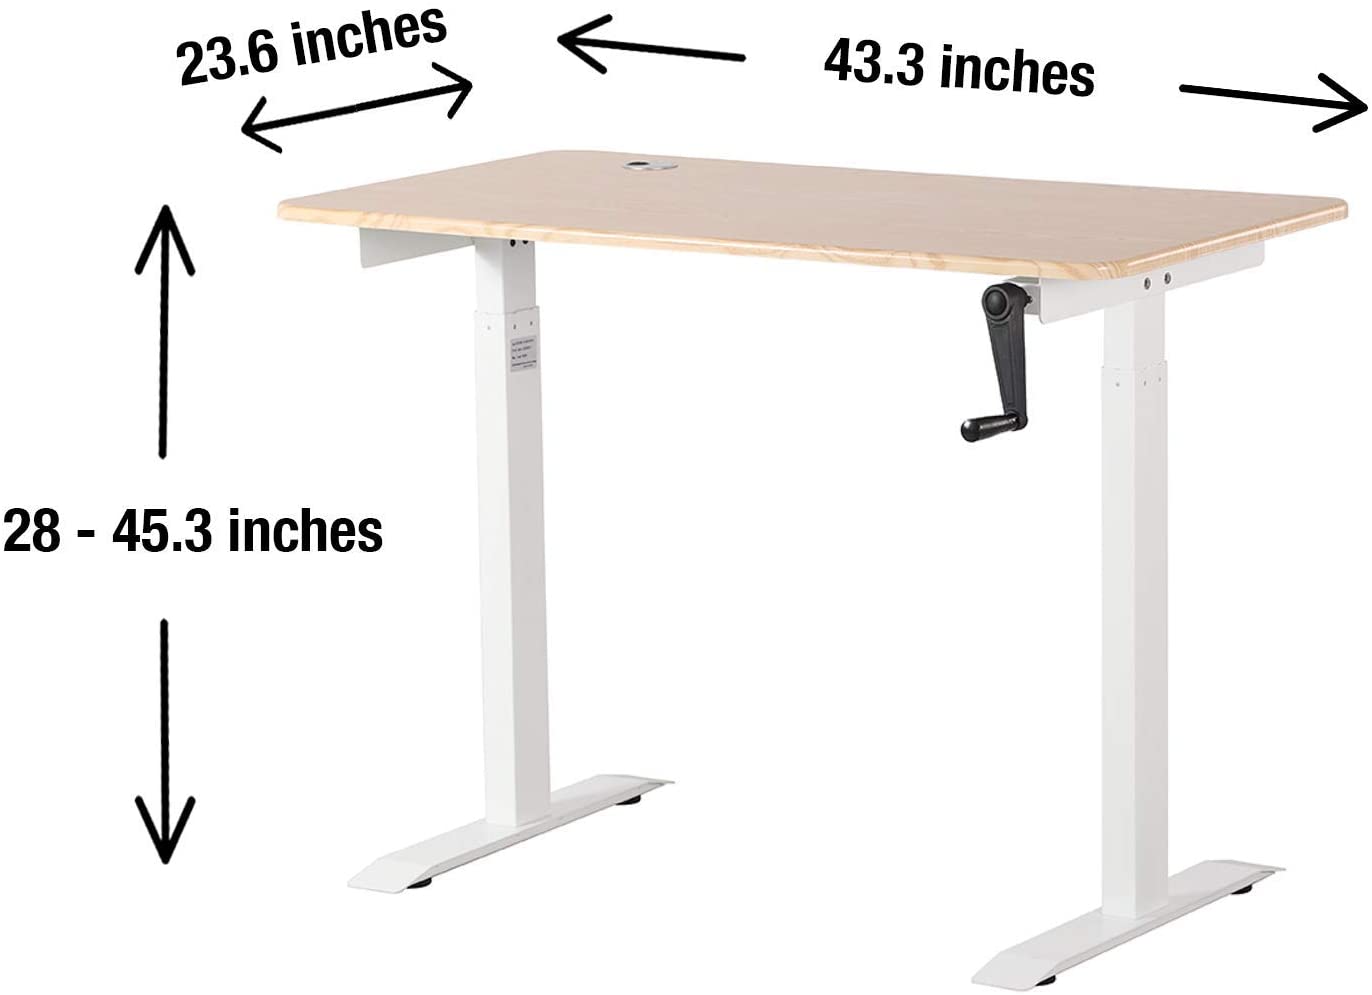 UNICOO - Crank Adjustable Height Standing Desk, Adjustable Sit to Stand up Desk,Home Office Table, Computer Table, Portable Writing Desk, Study Table (NTCSET-01)